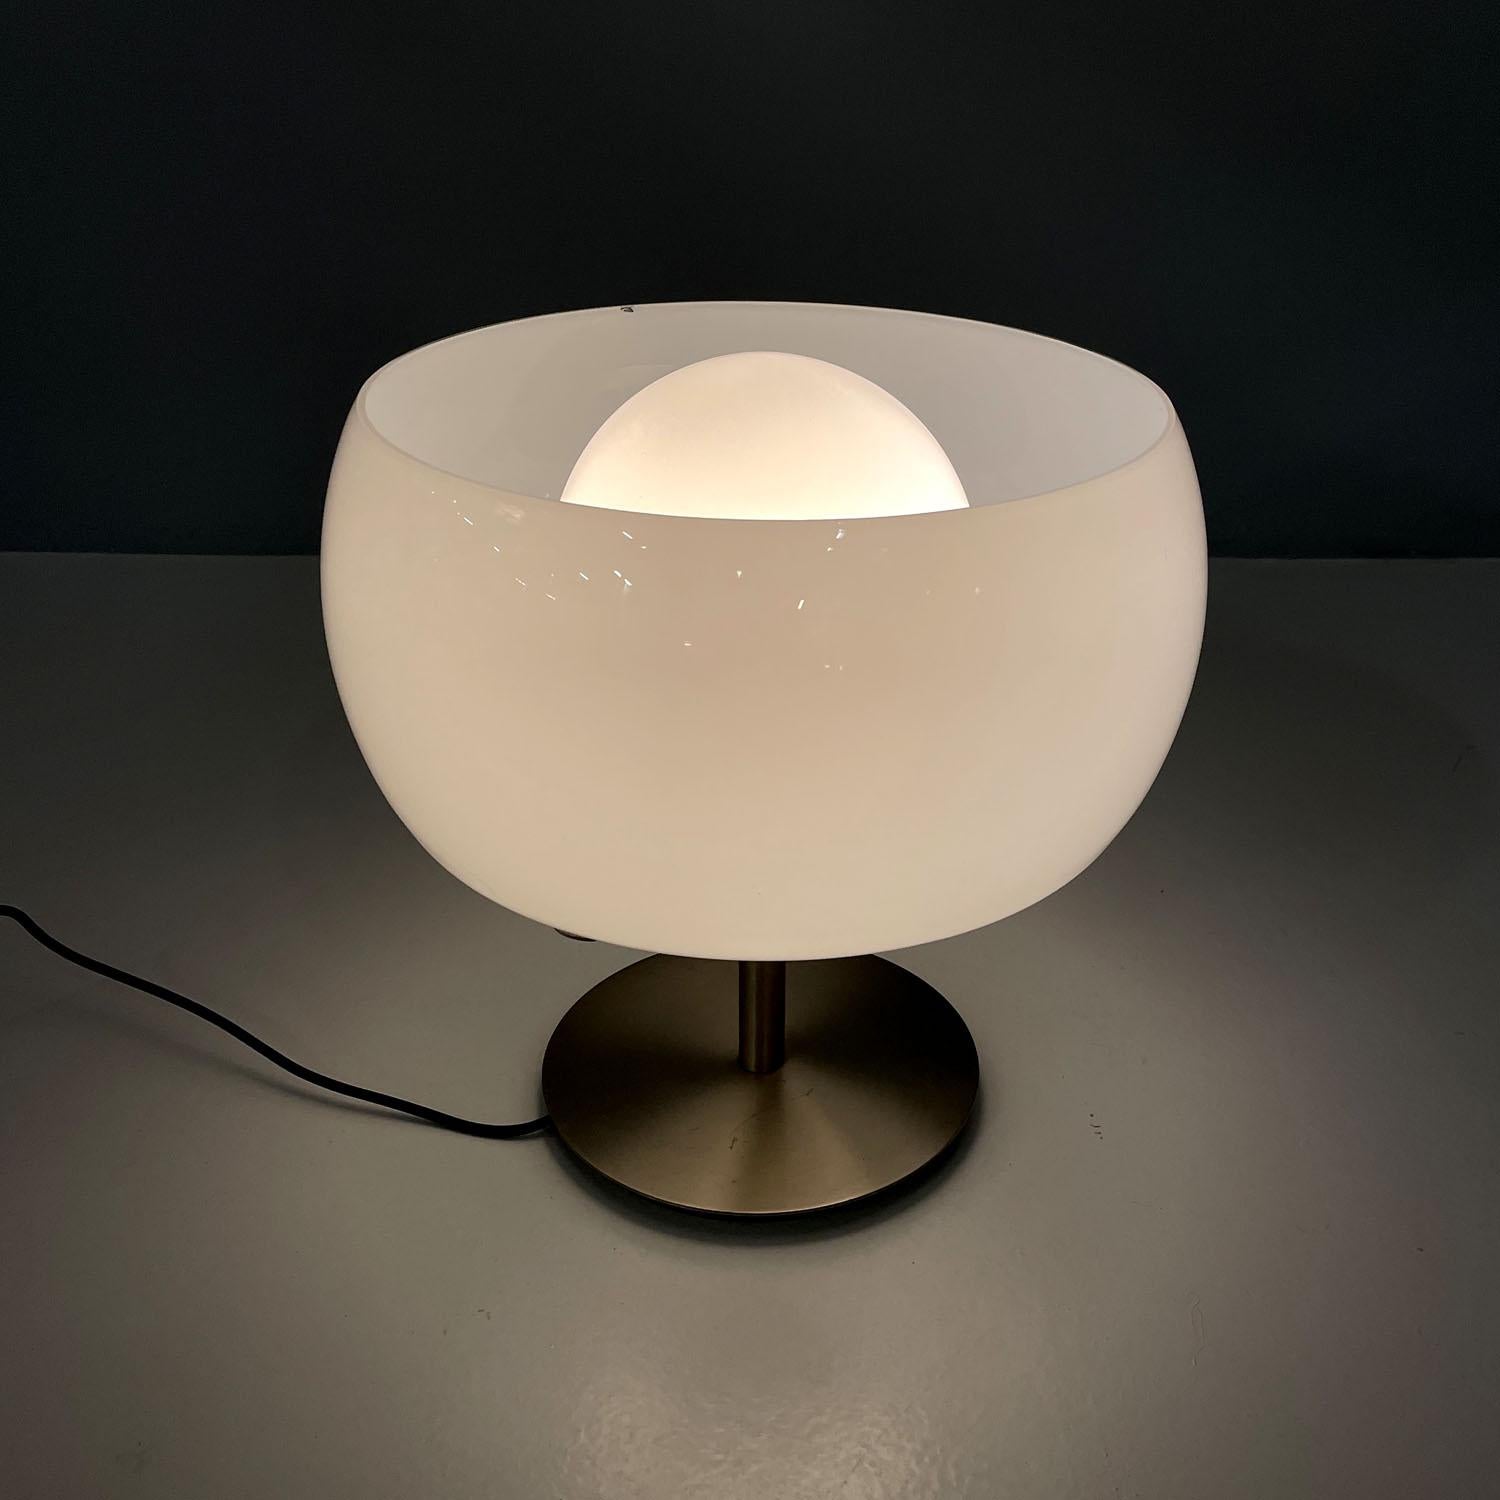 Italian mid-century modern table lamp Erse Vico Magistretti for Artemide, 1960s
Table lamp mod. Erse with a round base. The structure is composed of the base and a central stem, which are in bronzed nickel-plated metal. The lampshade is round in